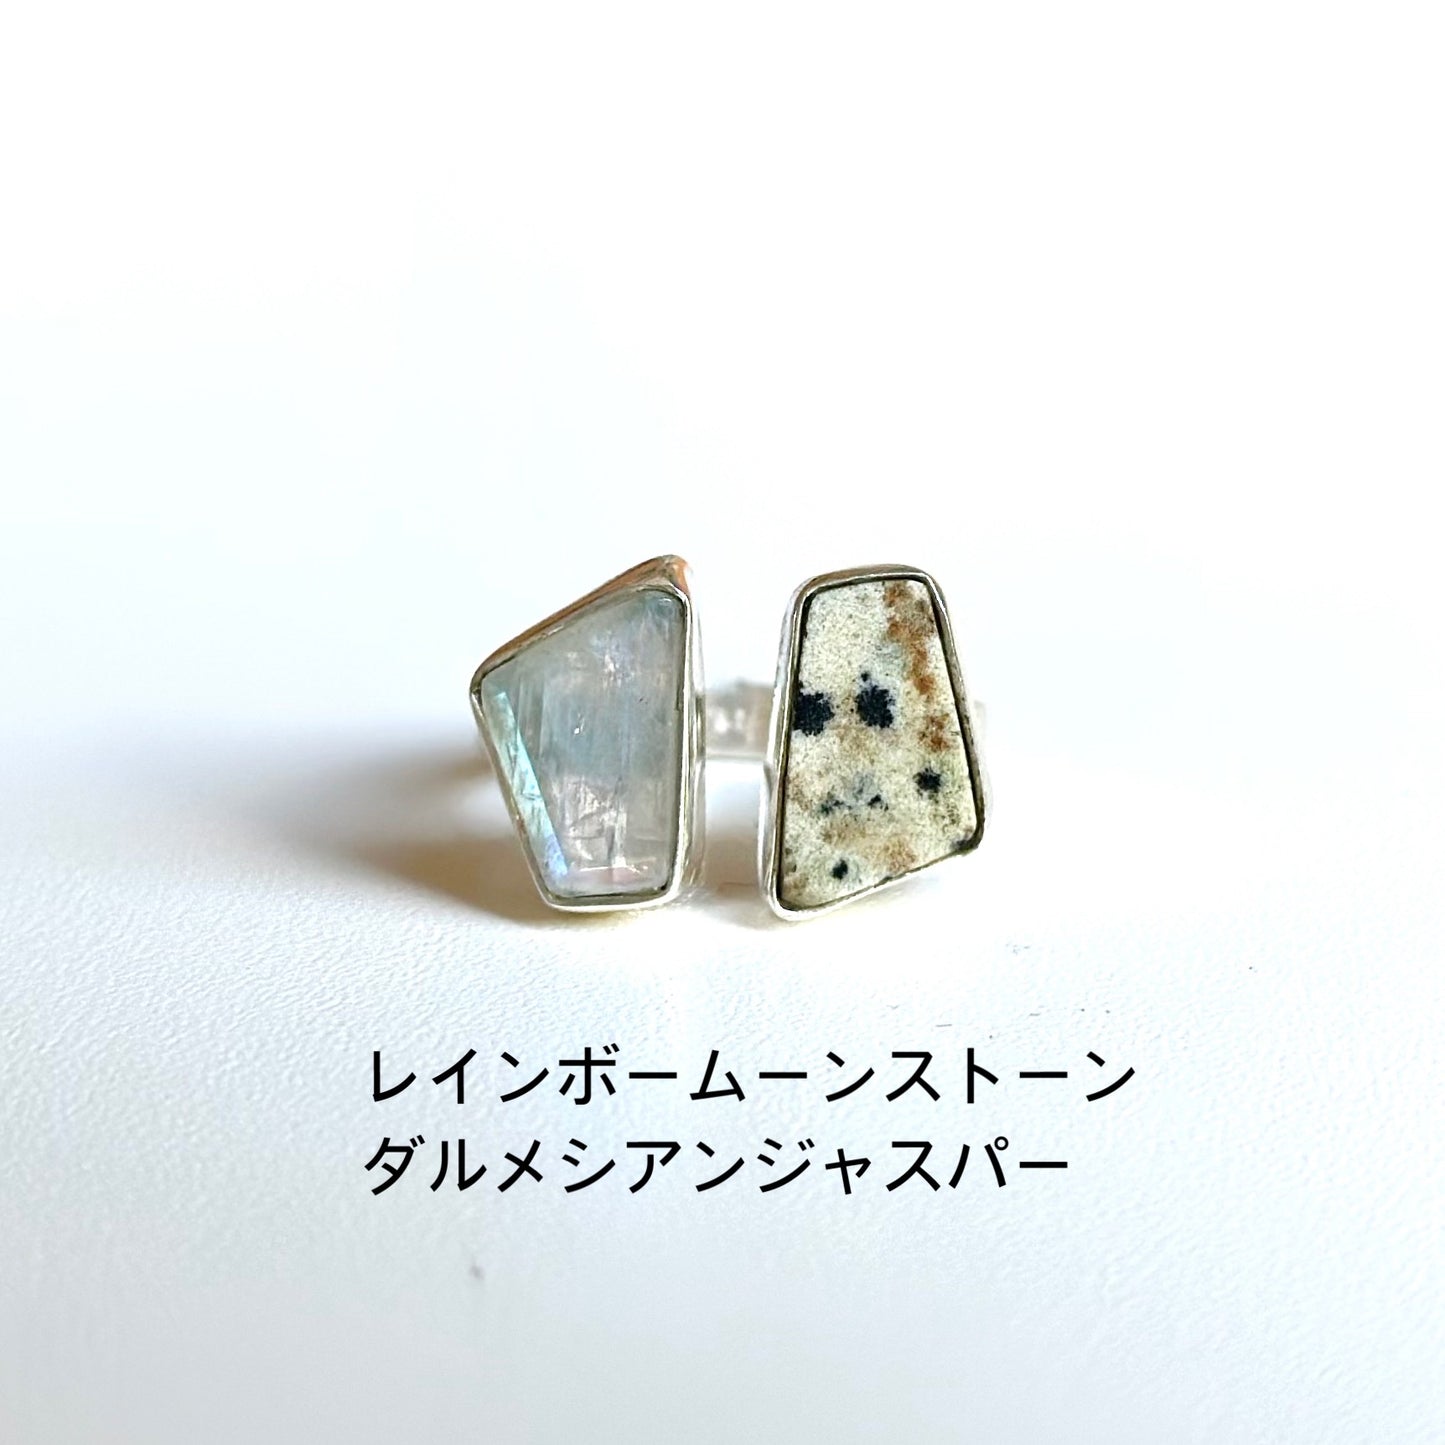 Silver925 2stone ring 4